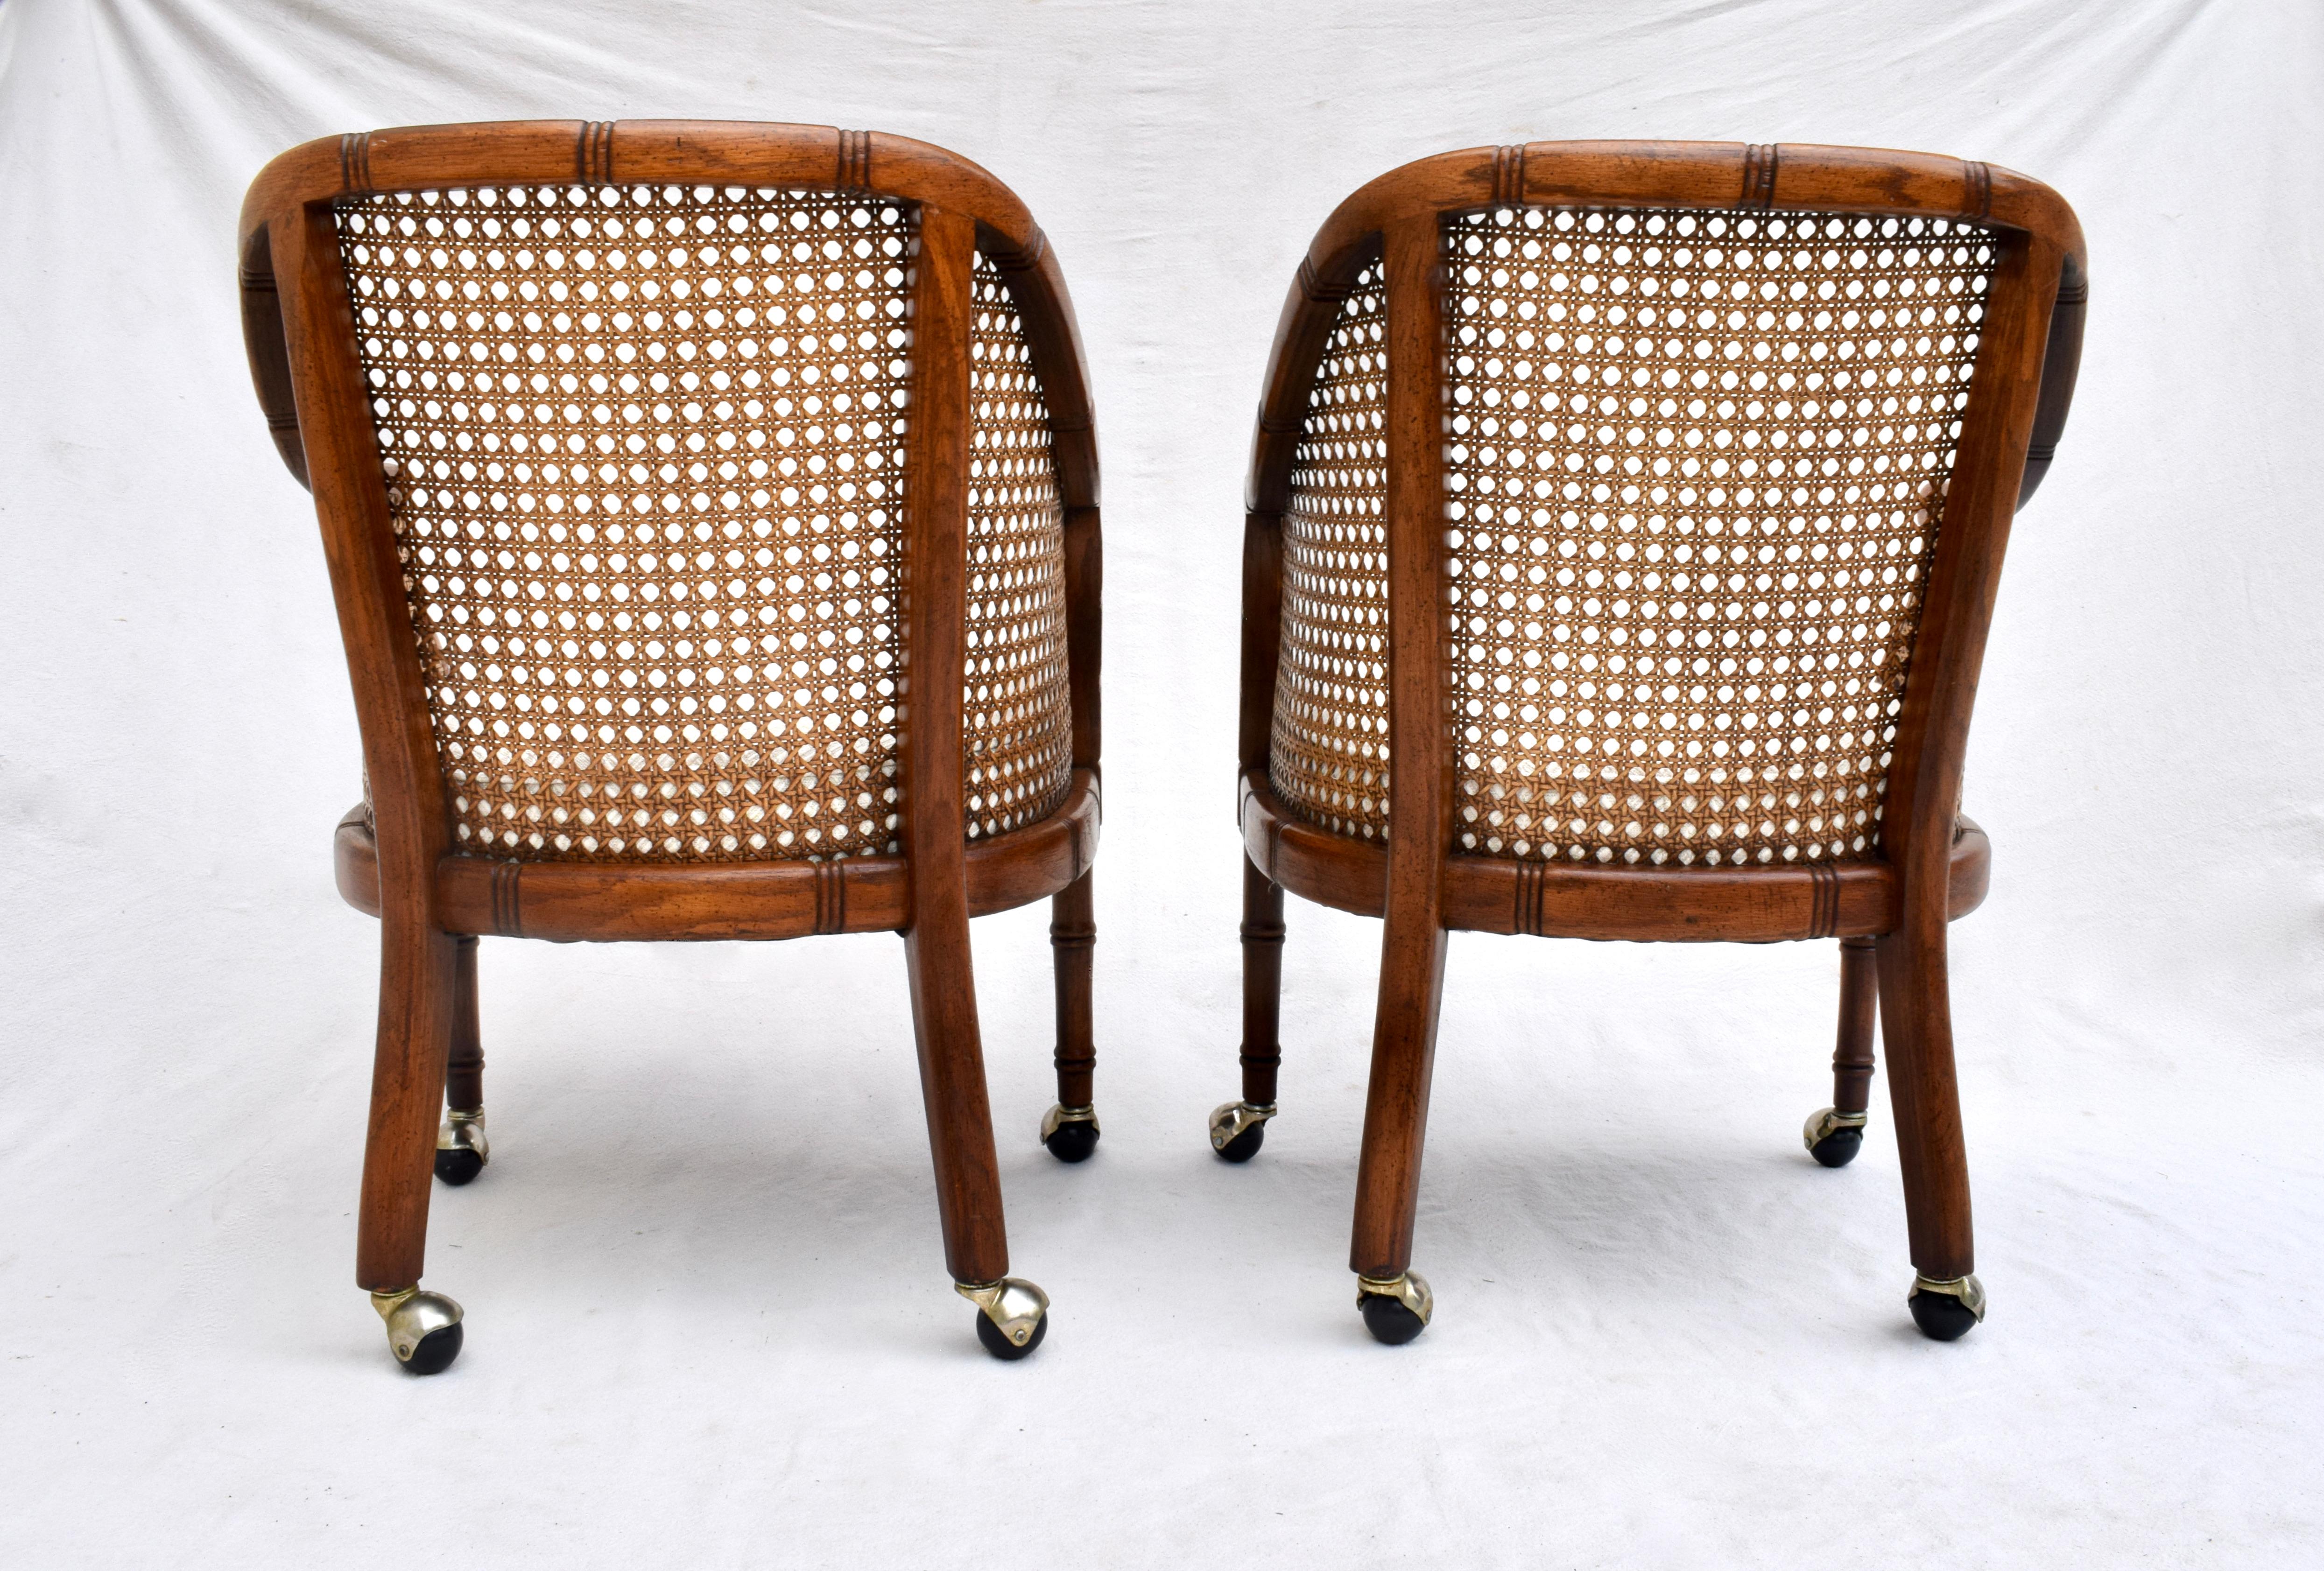 Brass Set of Four Caned Barrel Chairs on Casters